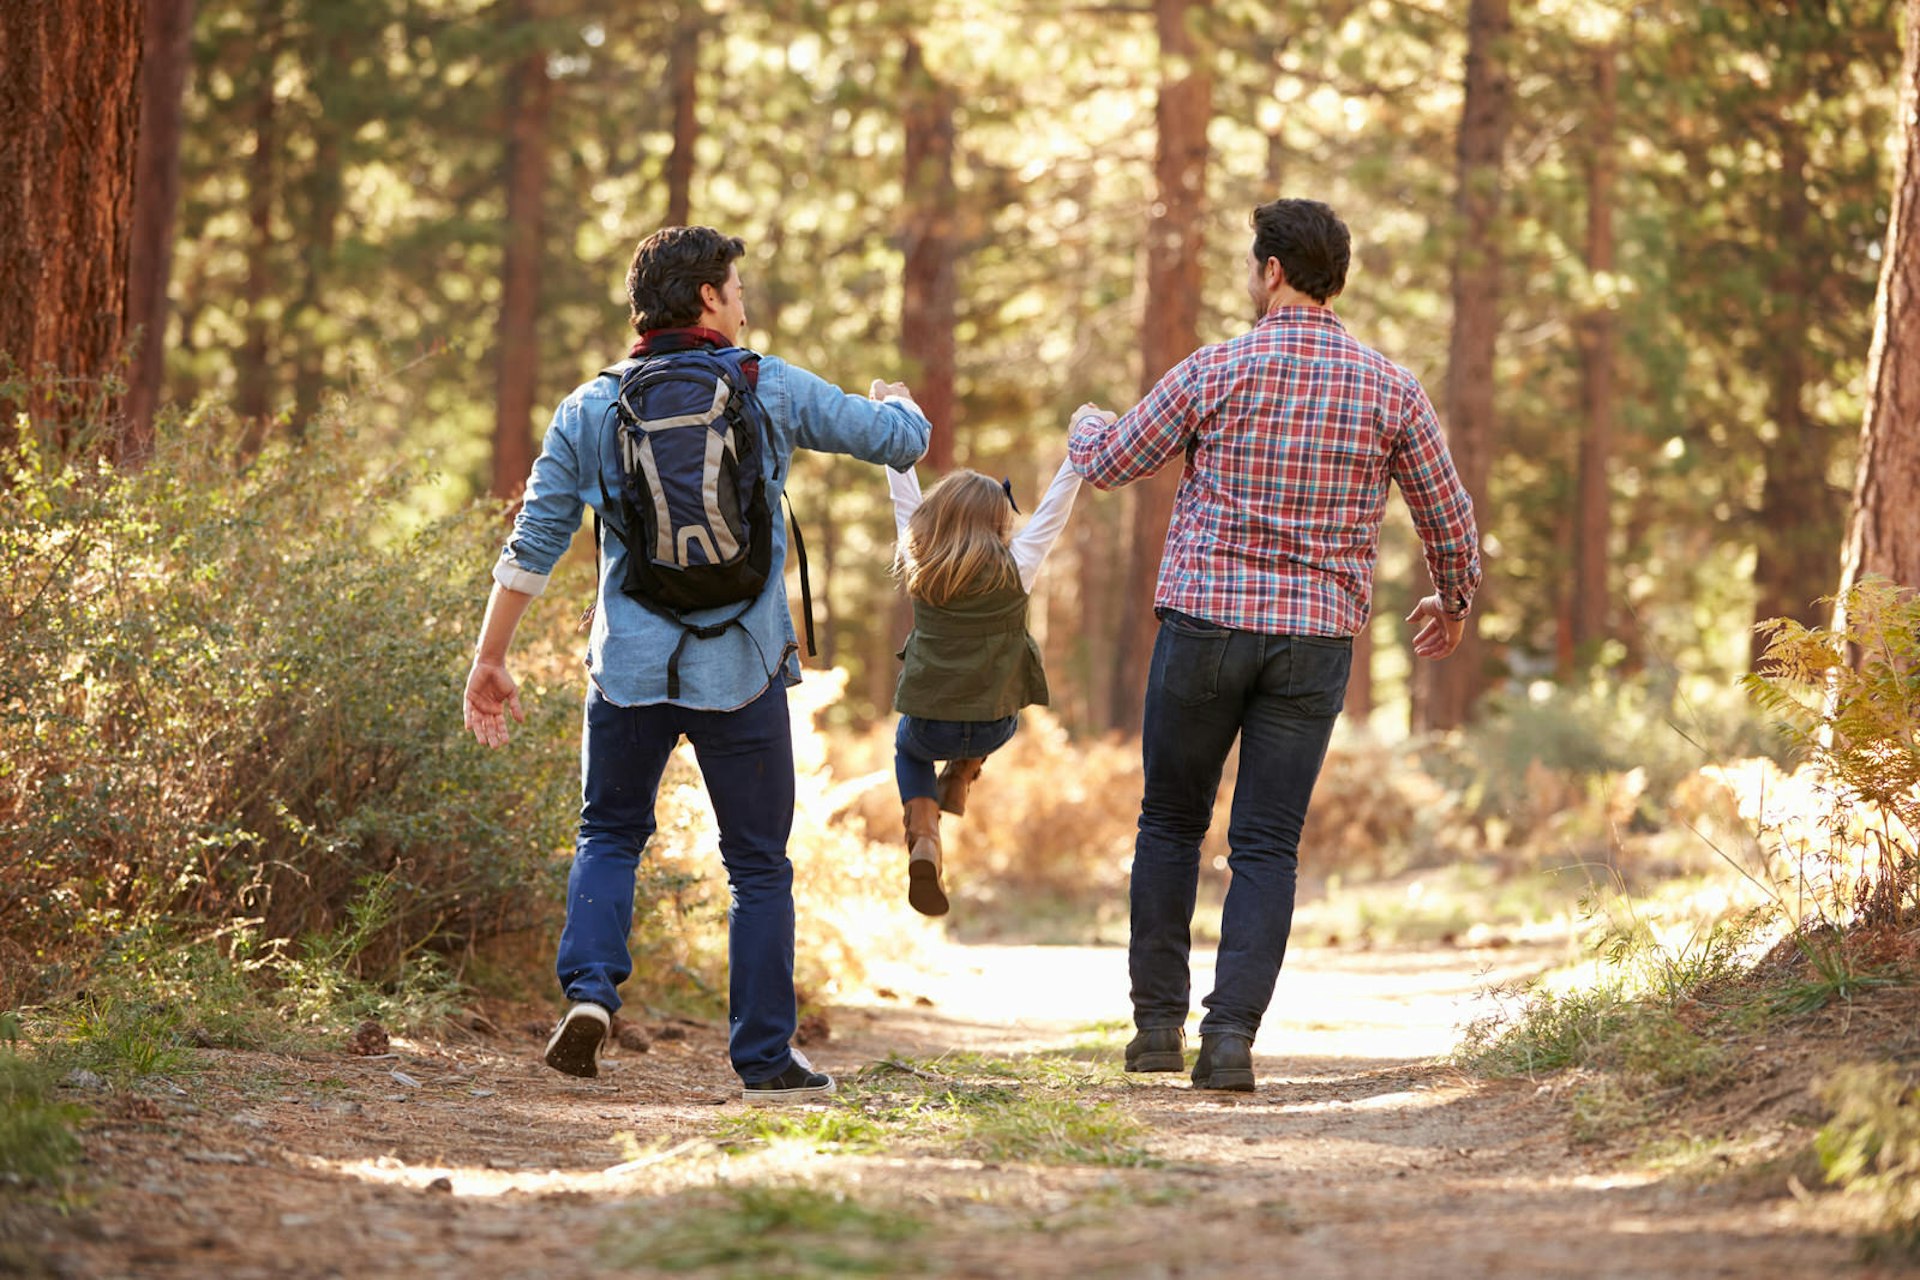 A pair of dads take their daughter on a walk through the forest during an affordable family vacation